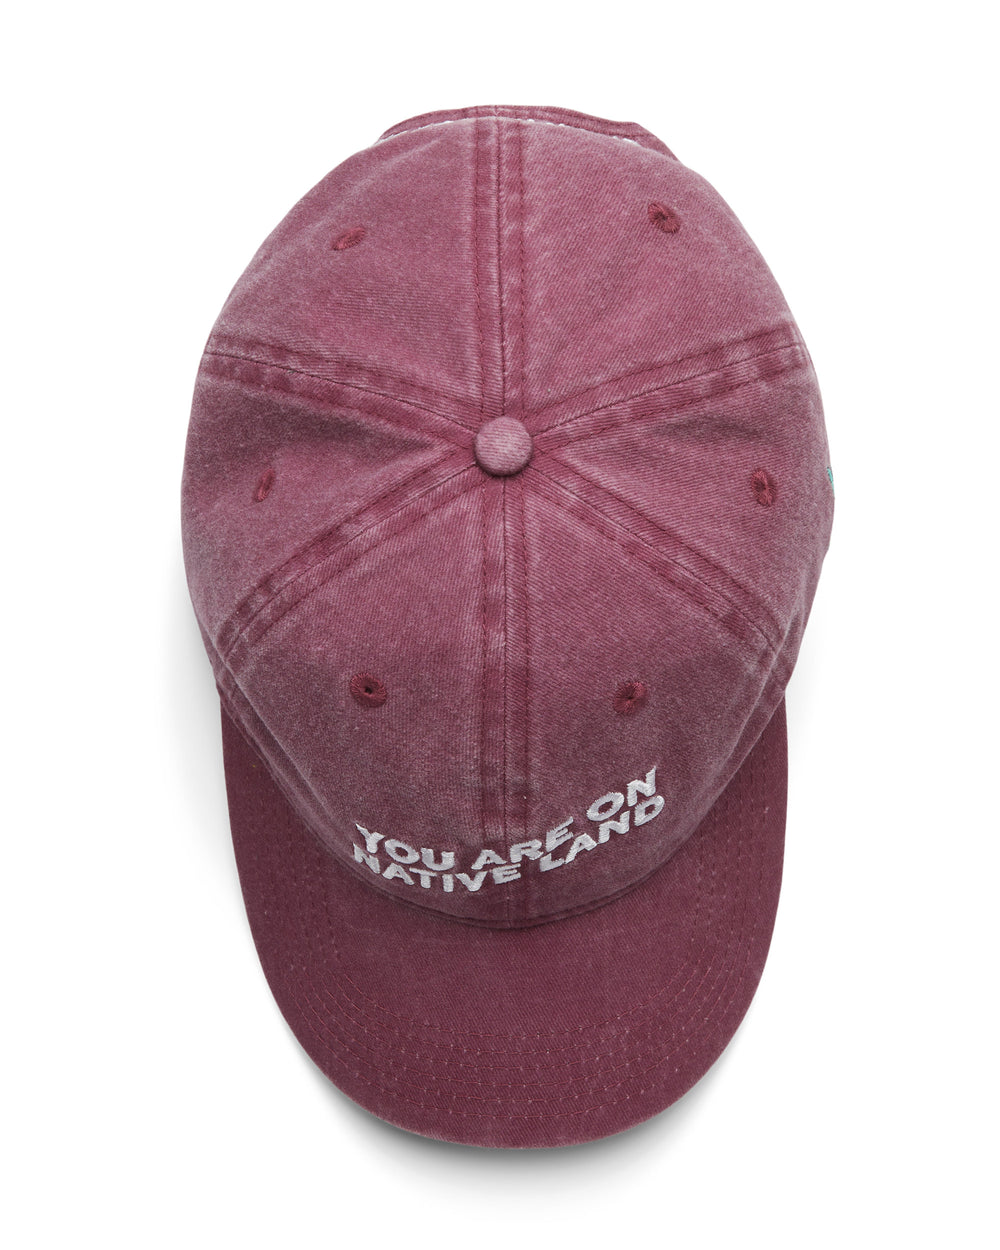 'YOU ARE ON NATIVE LAND DAD CAP - MAROON